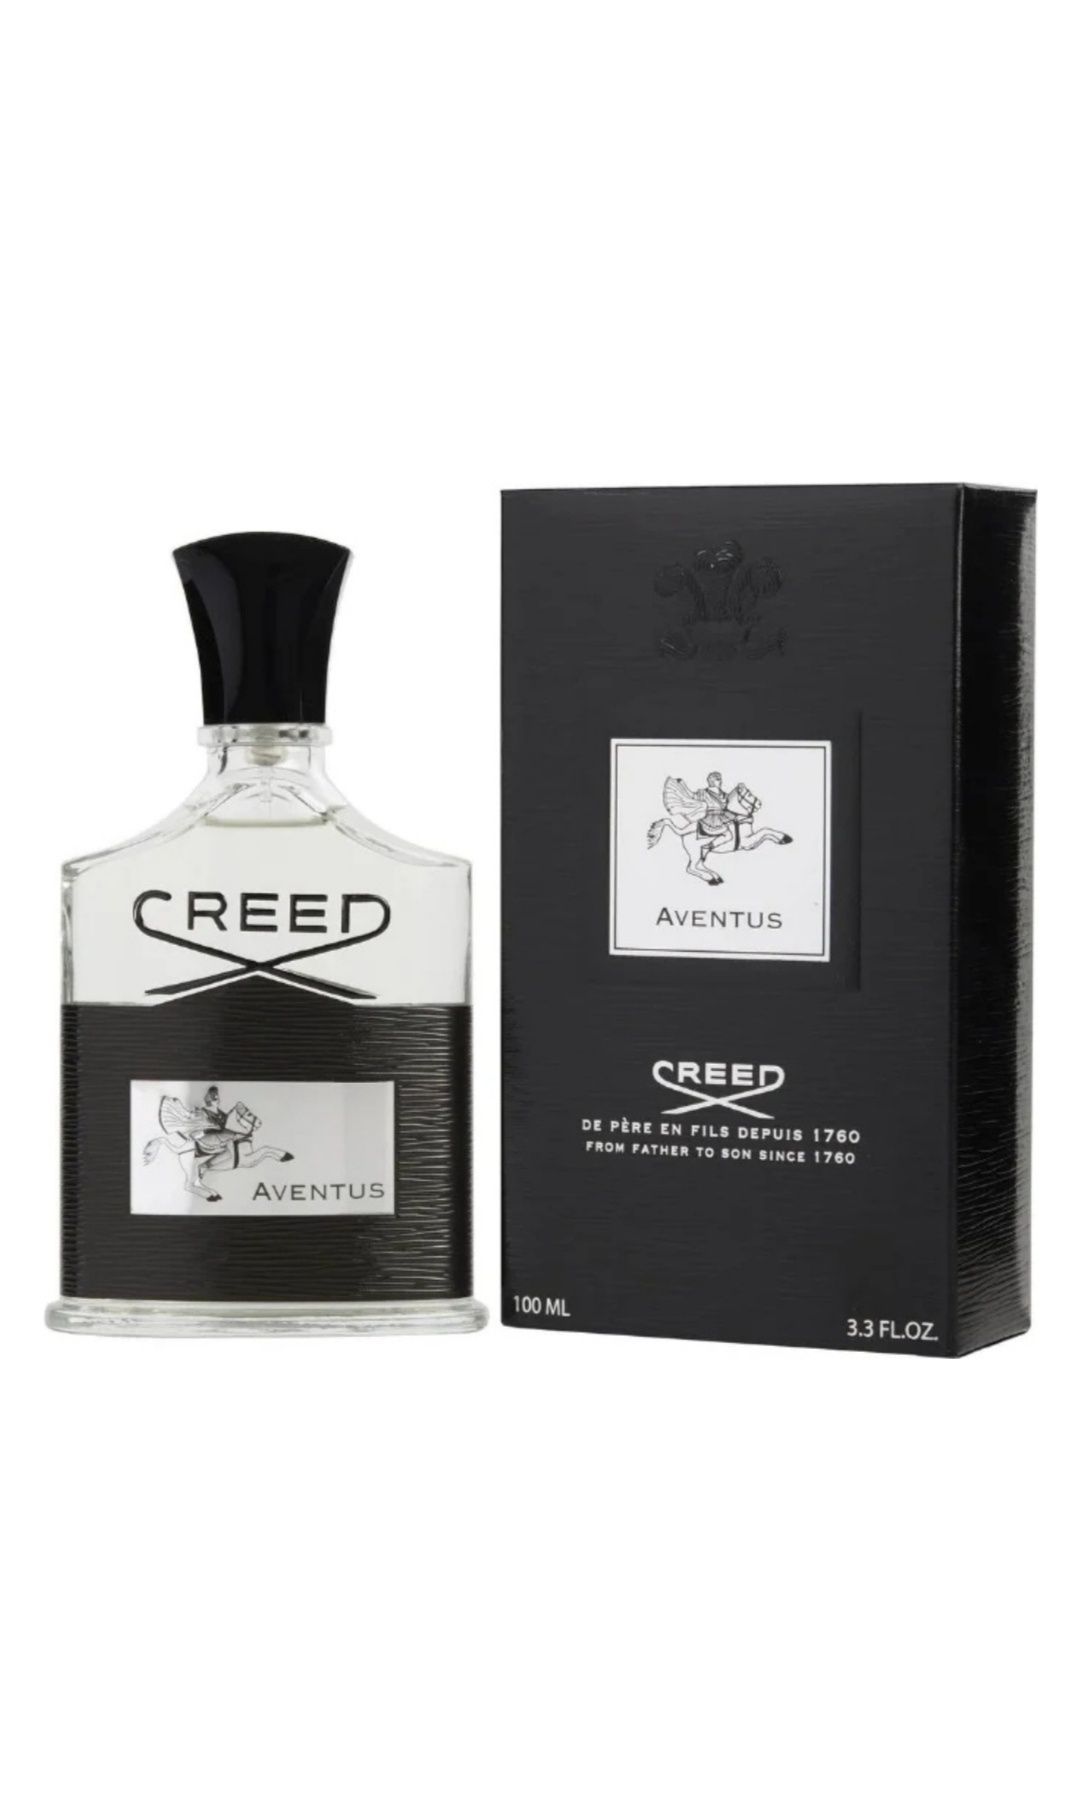 Creed,Versace, Tom ford